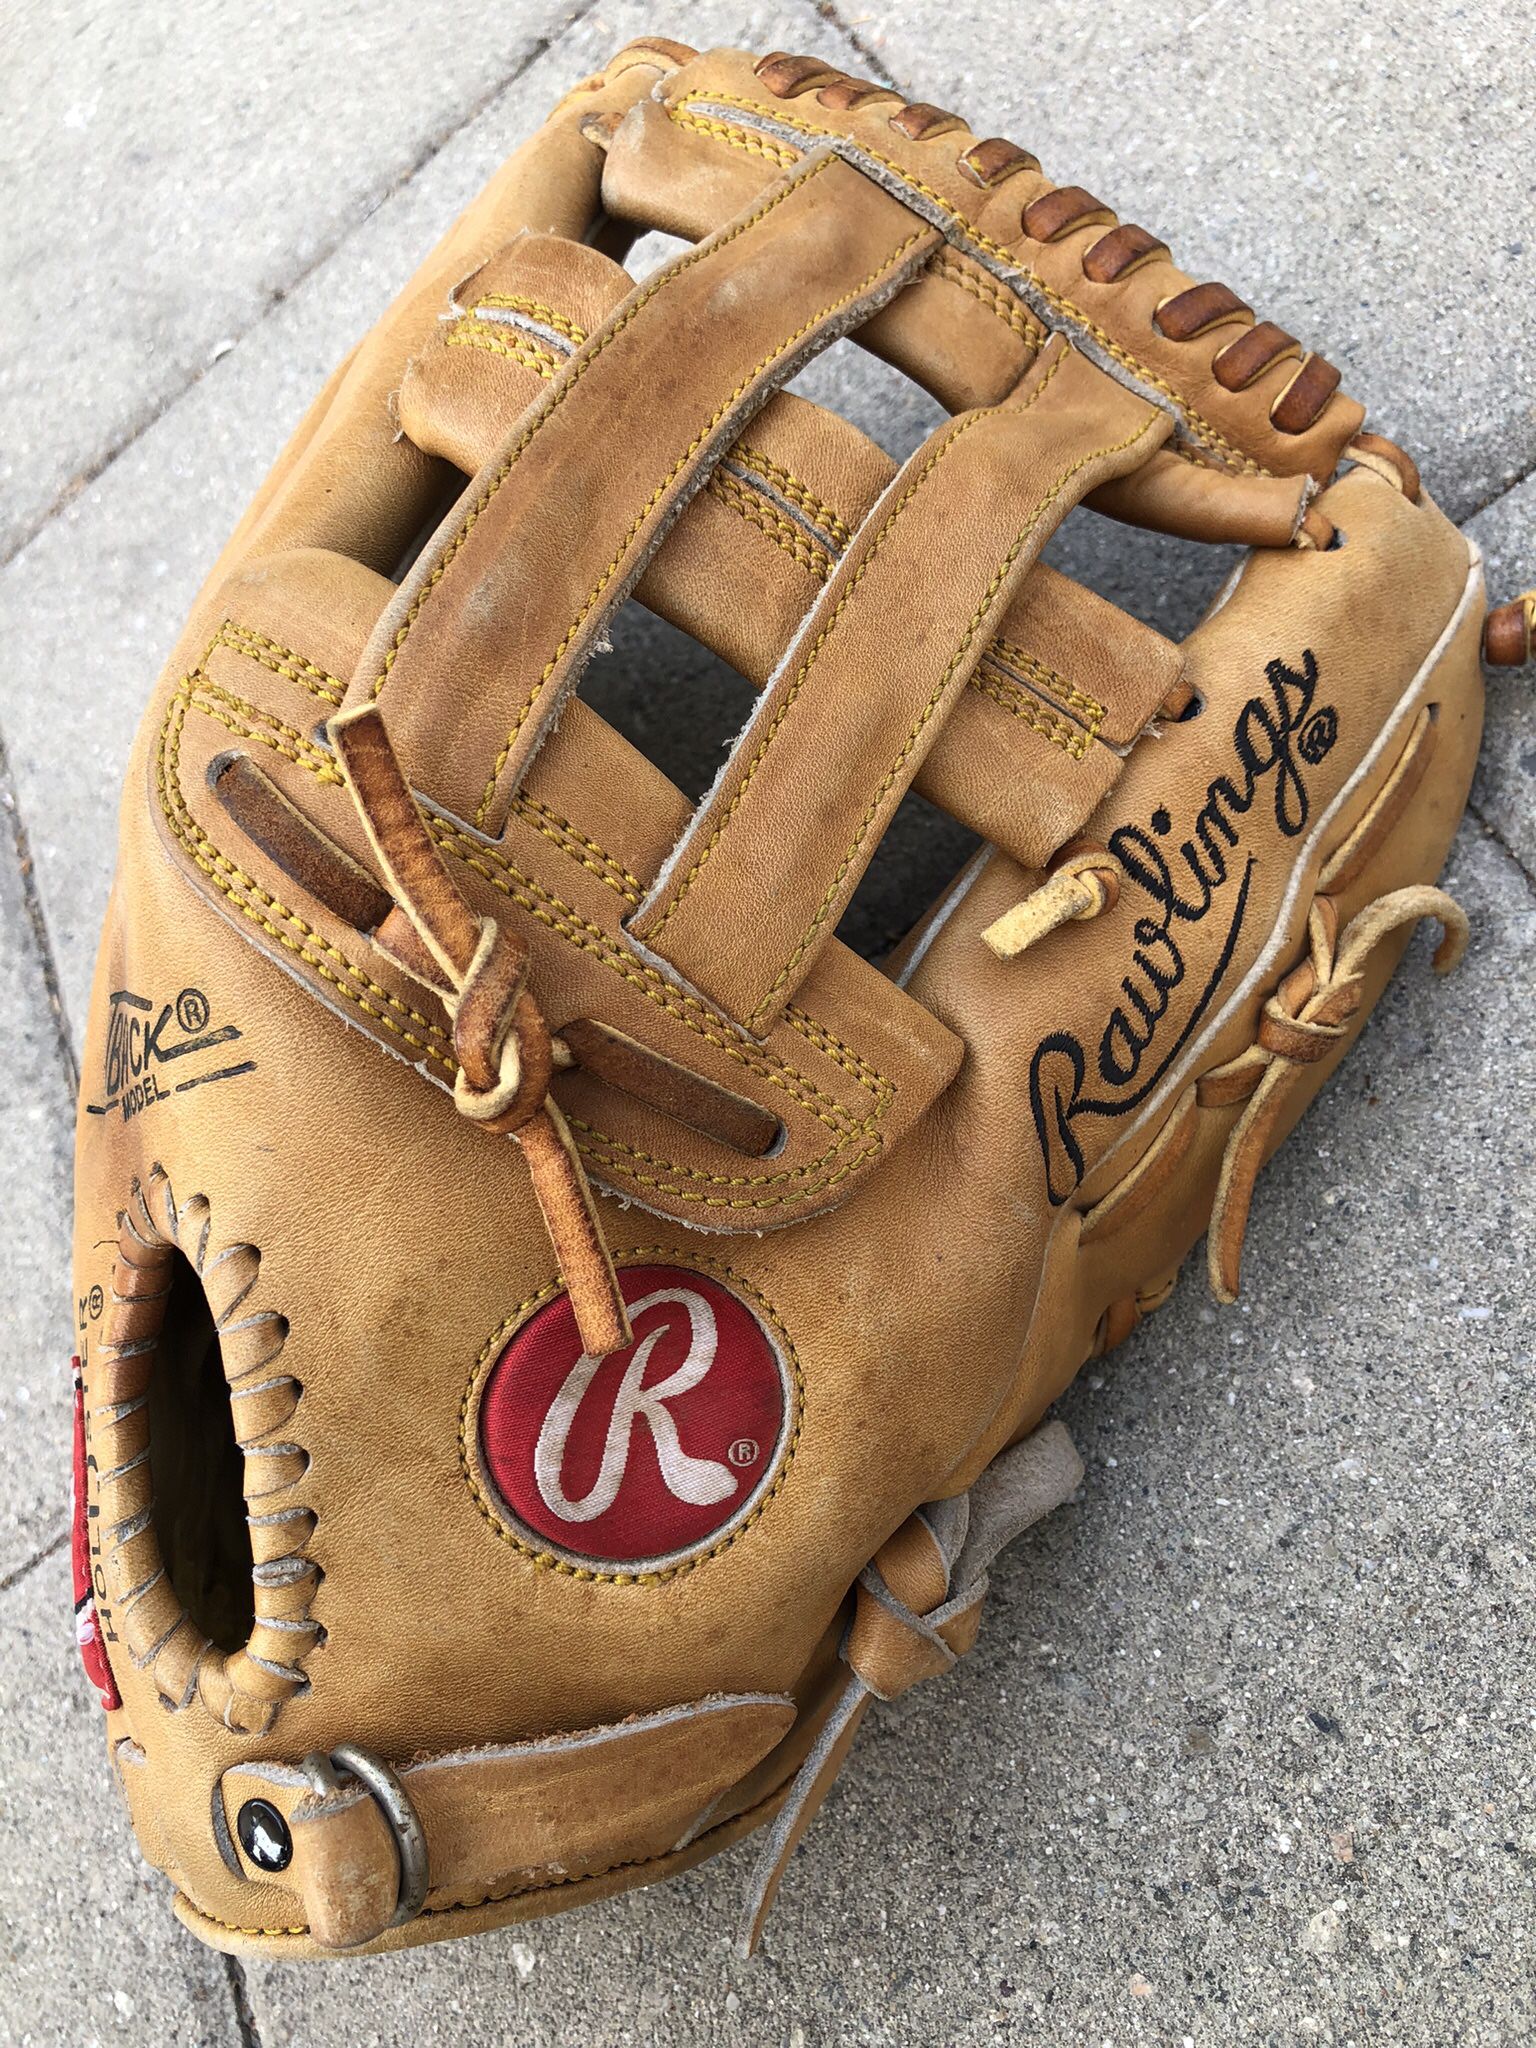 Rawlings Gold Glove Series Baseball Glove Quality Pro Glove #PRO-HFE Have More Equipment 